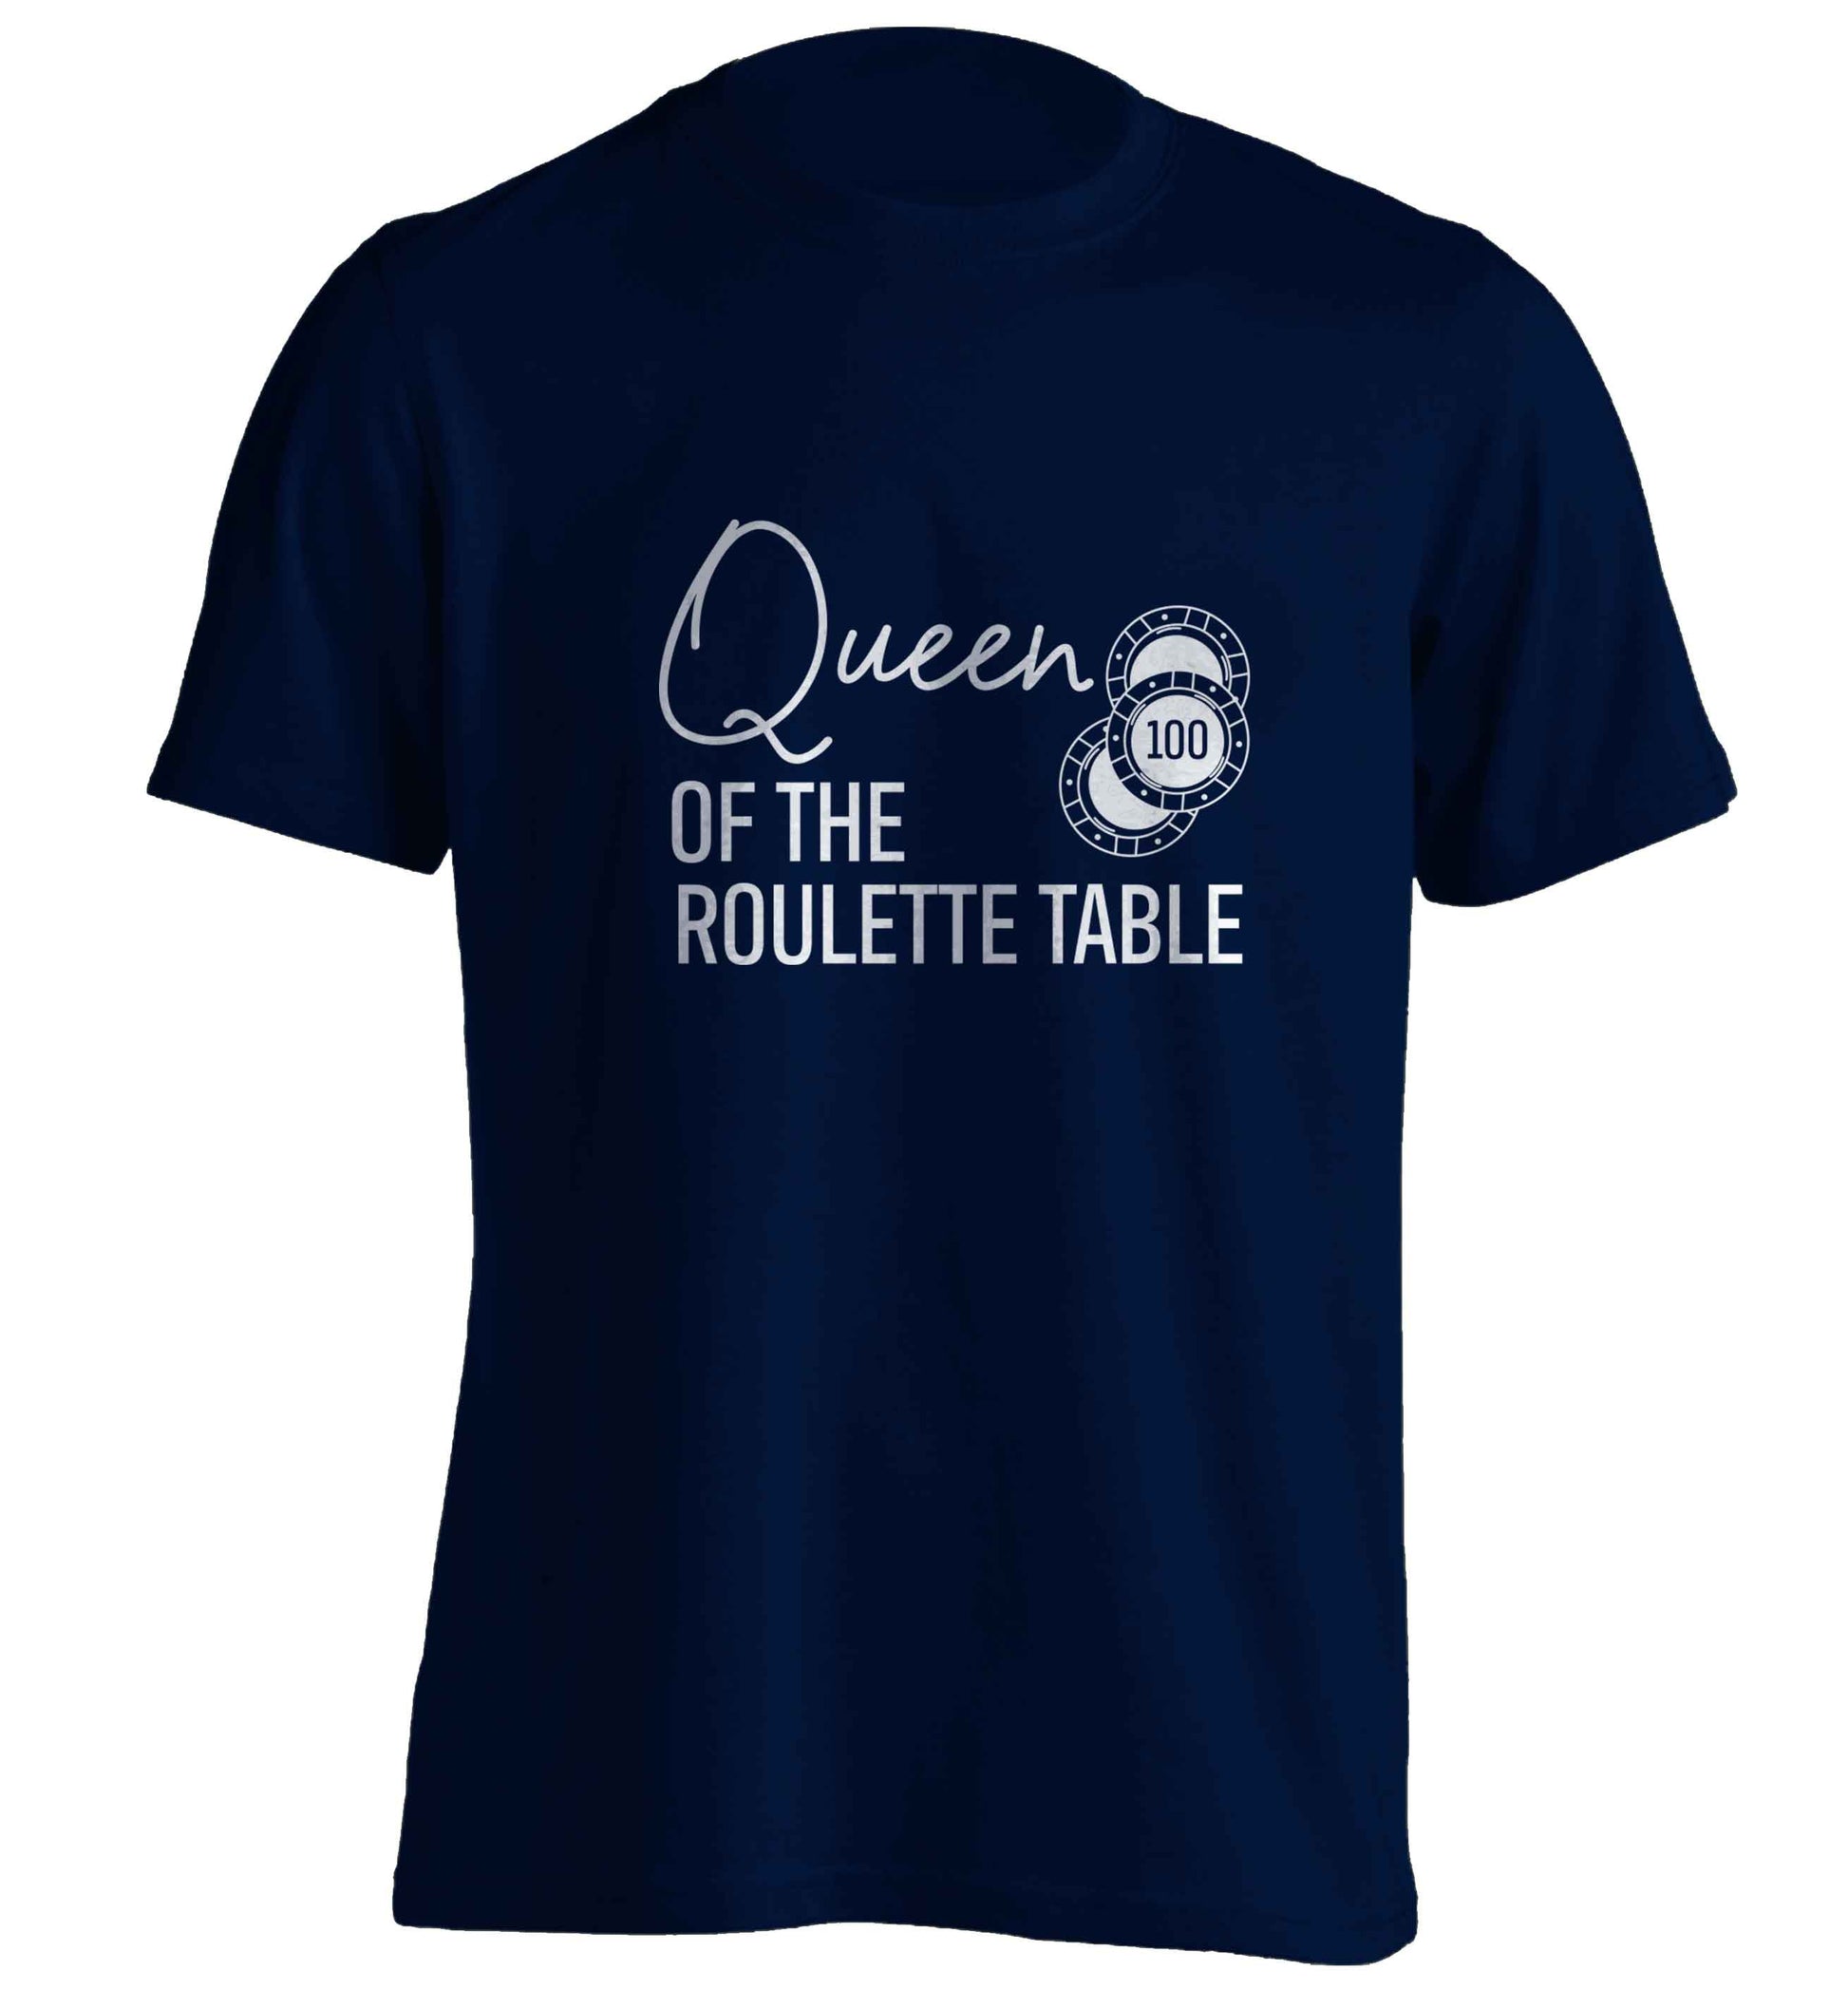 Queen of the roulette table adults unisex navy Tshirt 2XL